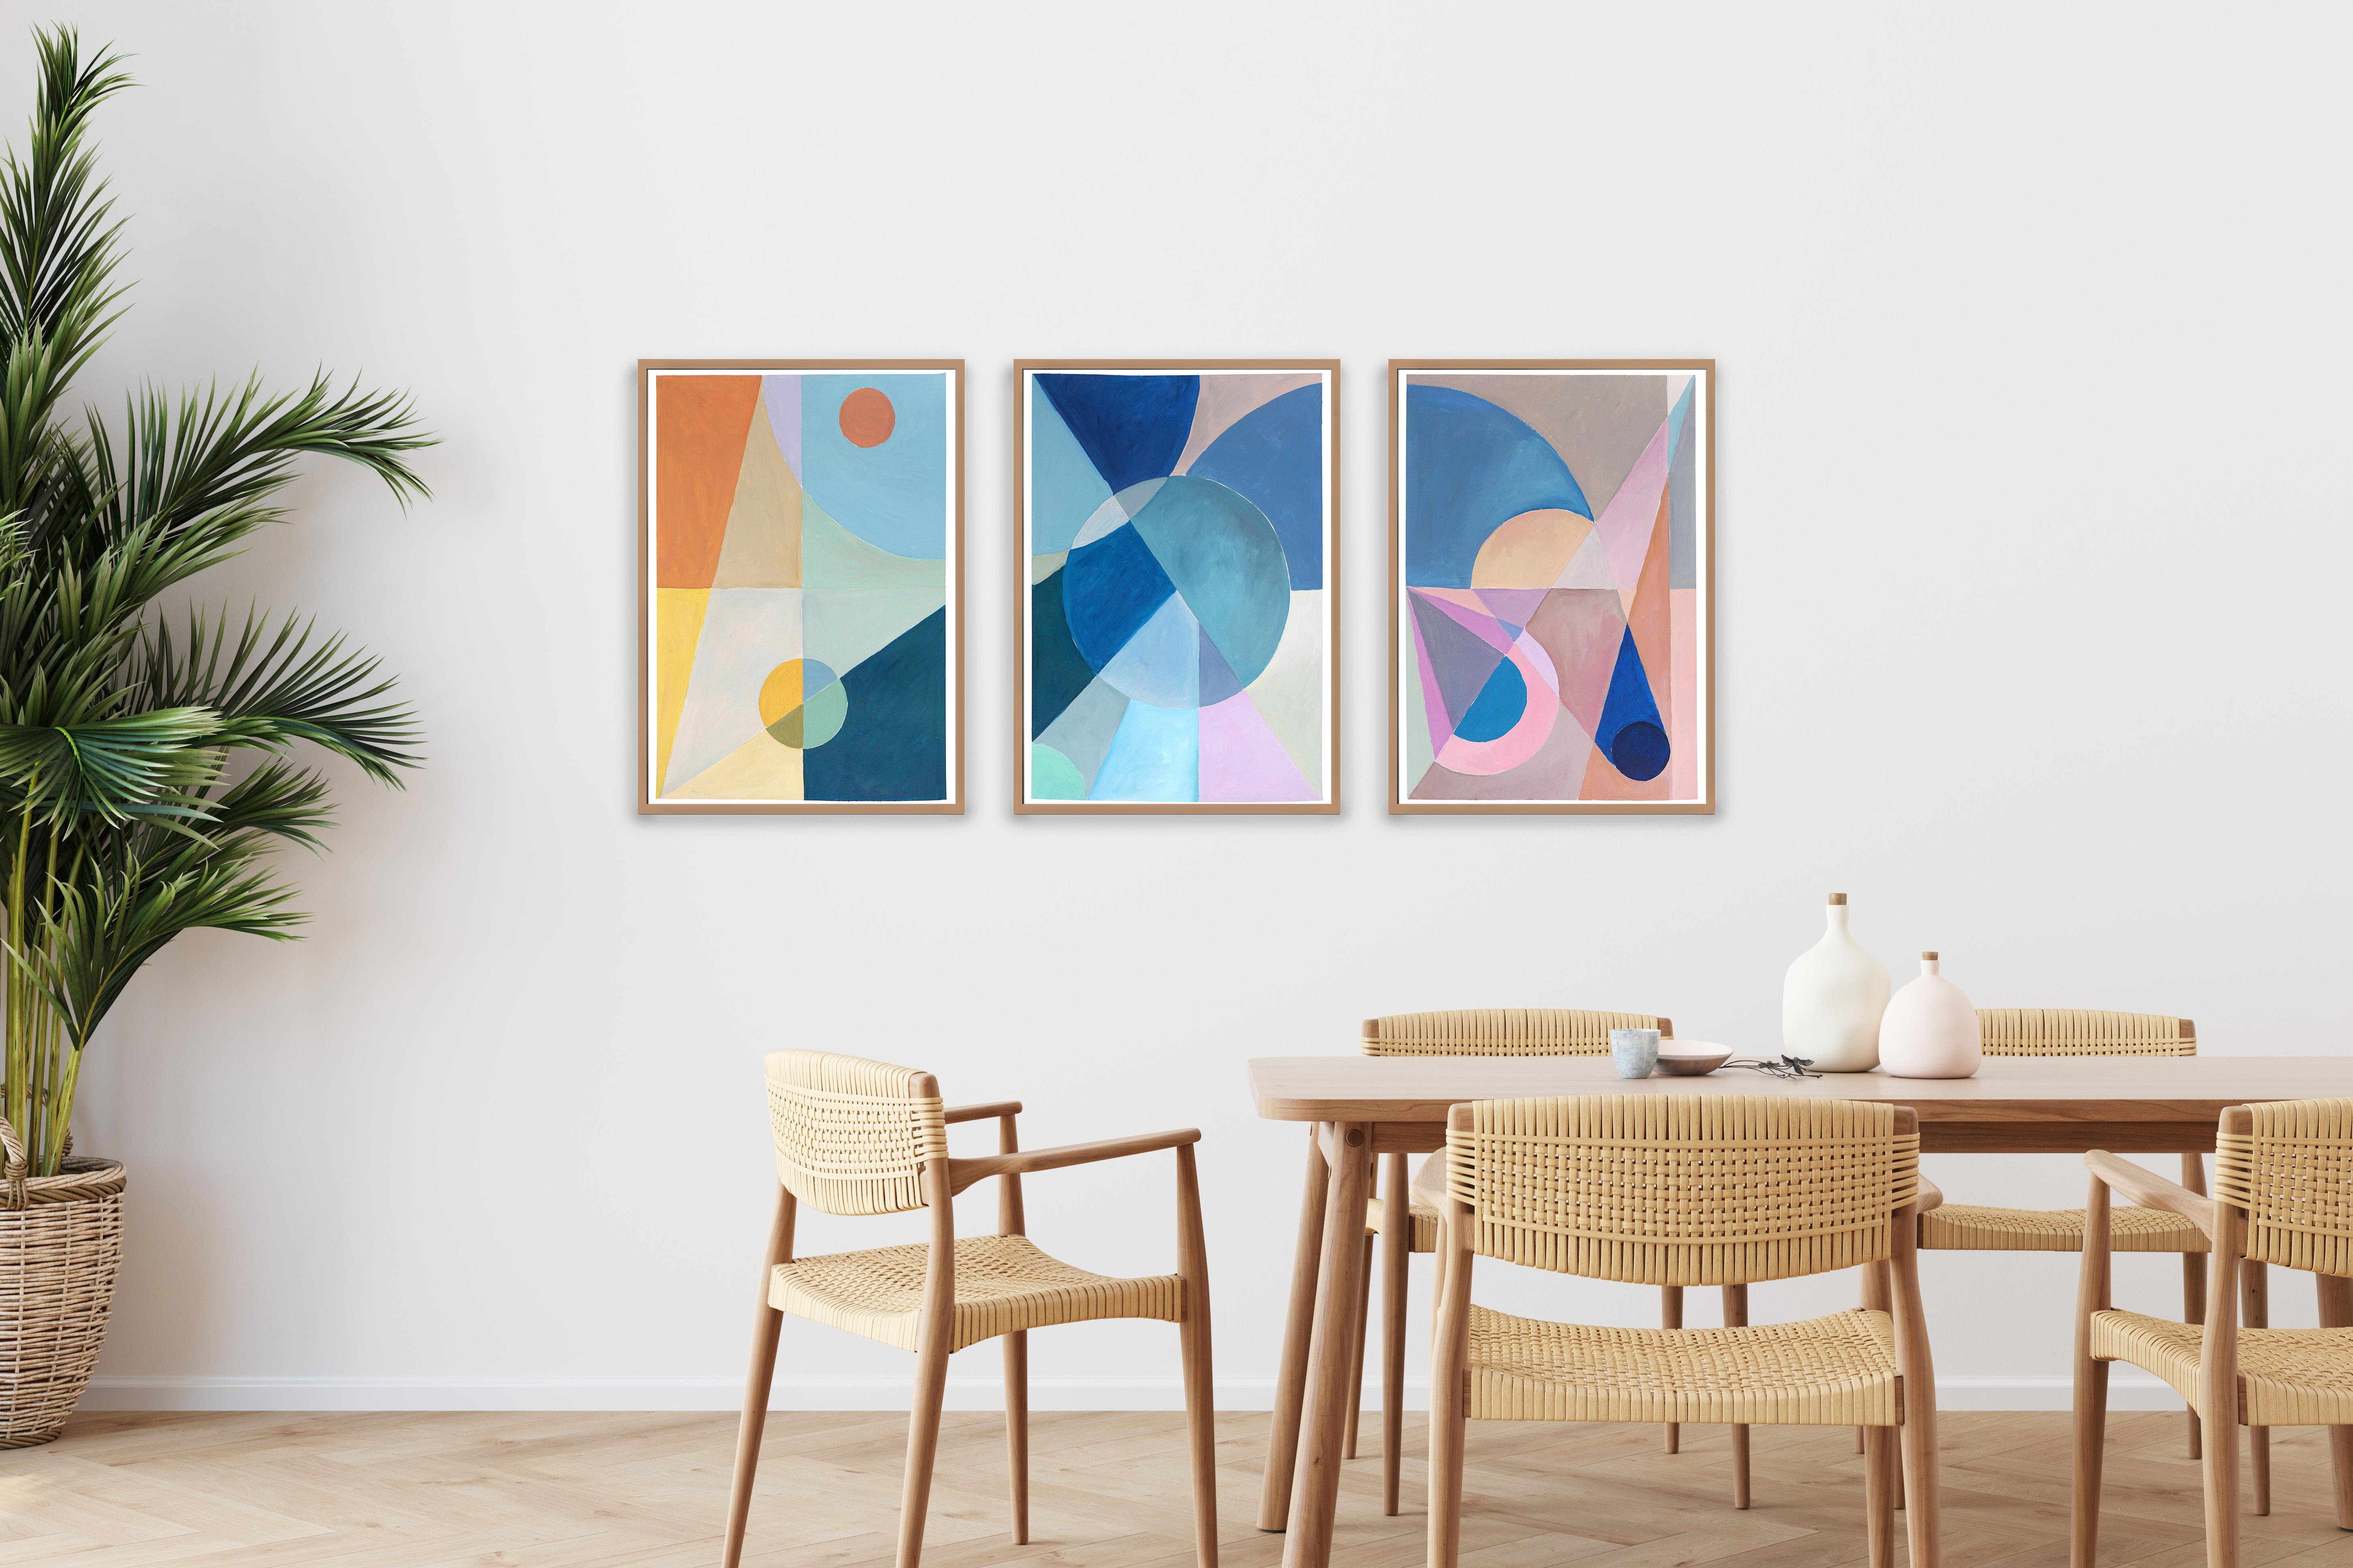 Southern Hemisphere Twilight Pastel Tones Triptych, Blue, Pink, Yellow Astronomy - Abstract Geometric Painting by Natalia Roman